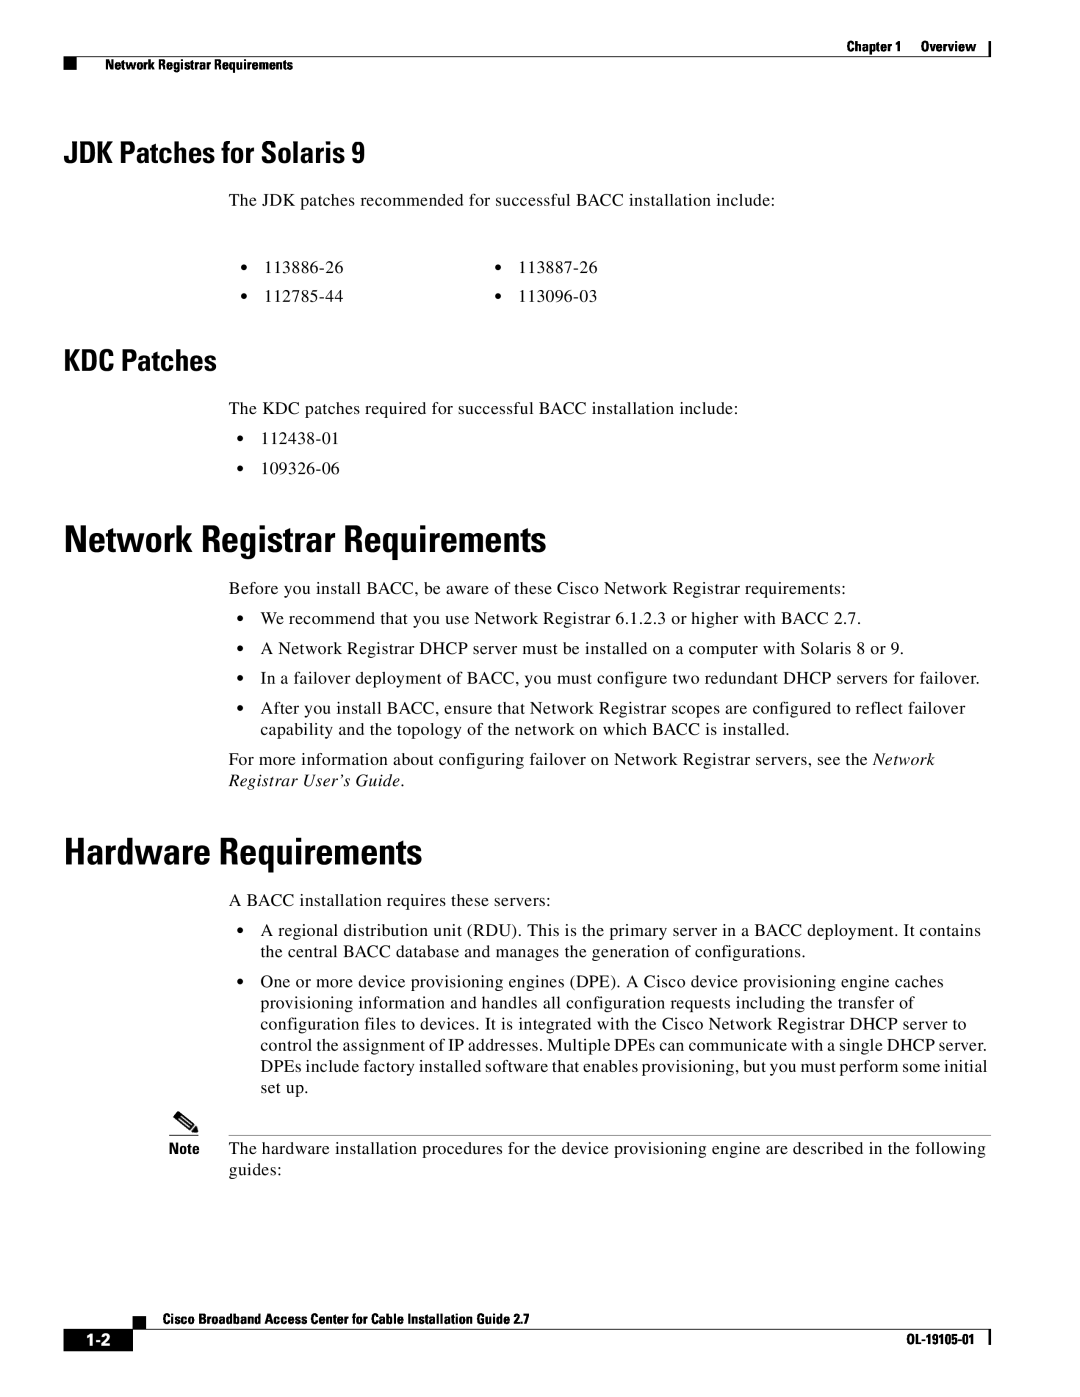 Cisco Systems Broadband Access Center manual Network Registrar Requirements, Hardware Requirements, KDC Patches 